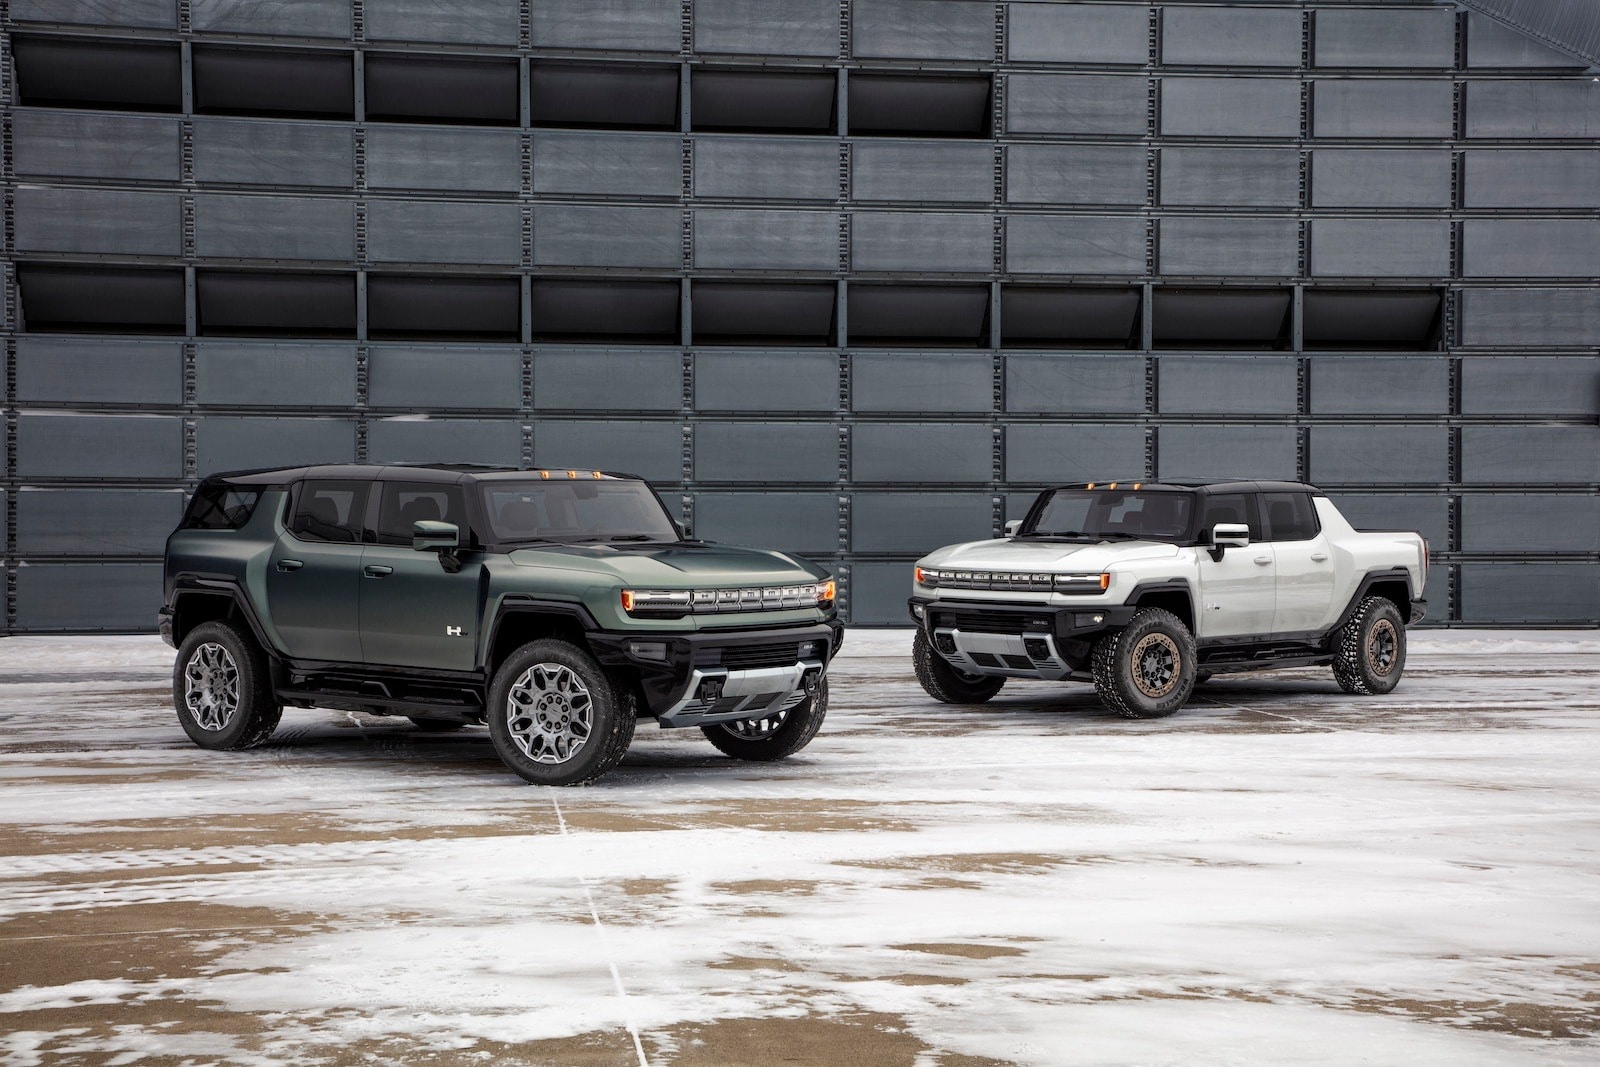 2024 GMC Hummer EV SUV vs. 2022 Hummer EV Truck: How Do They Compare?